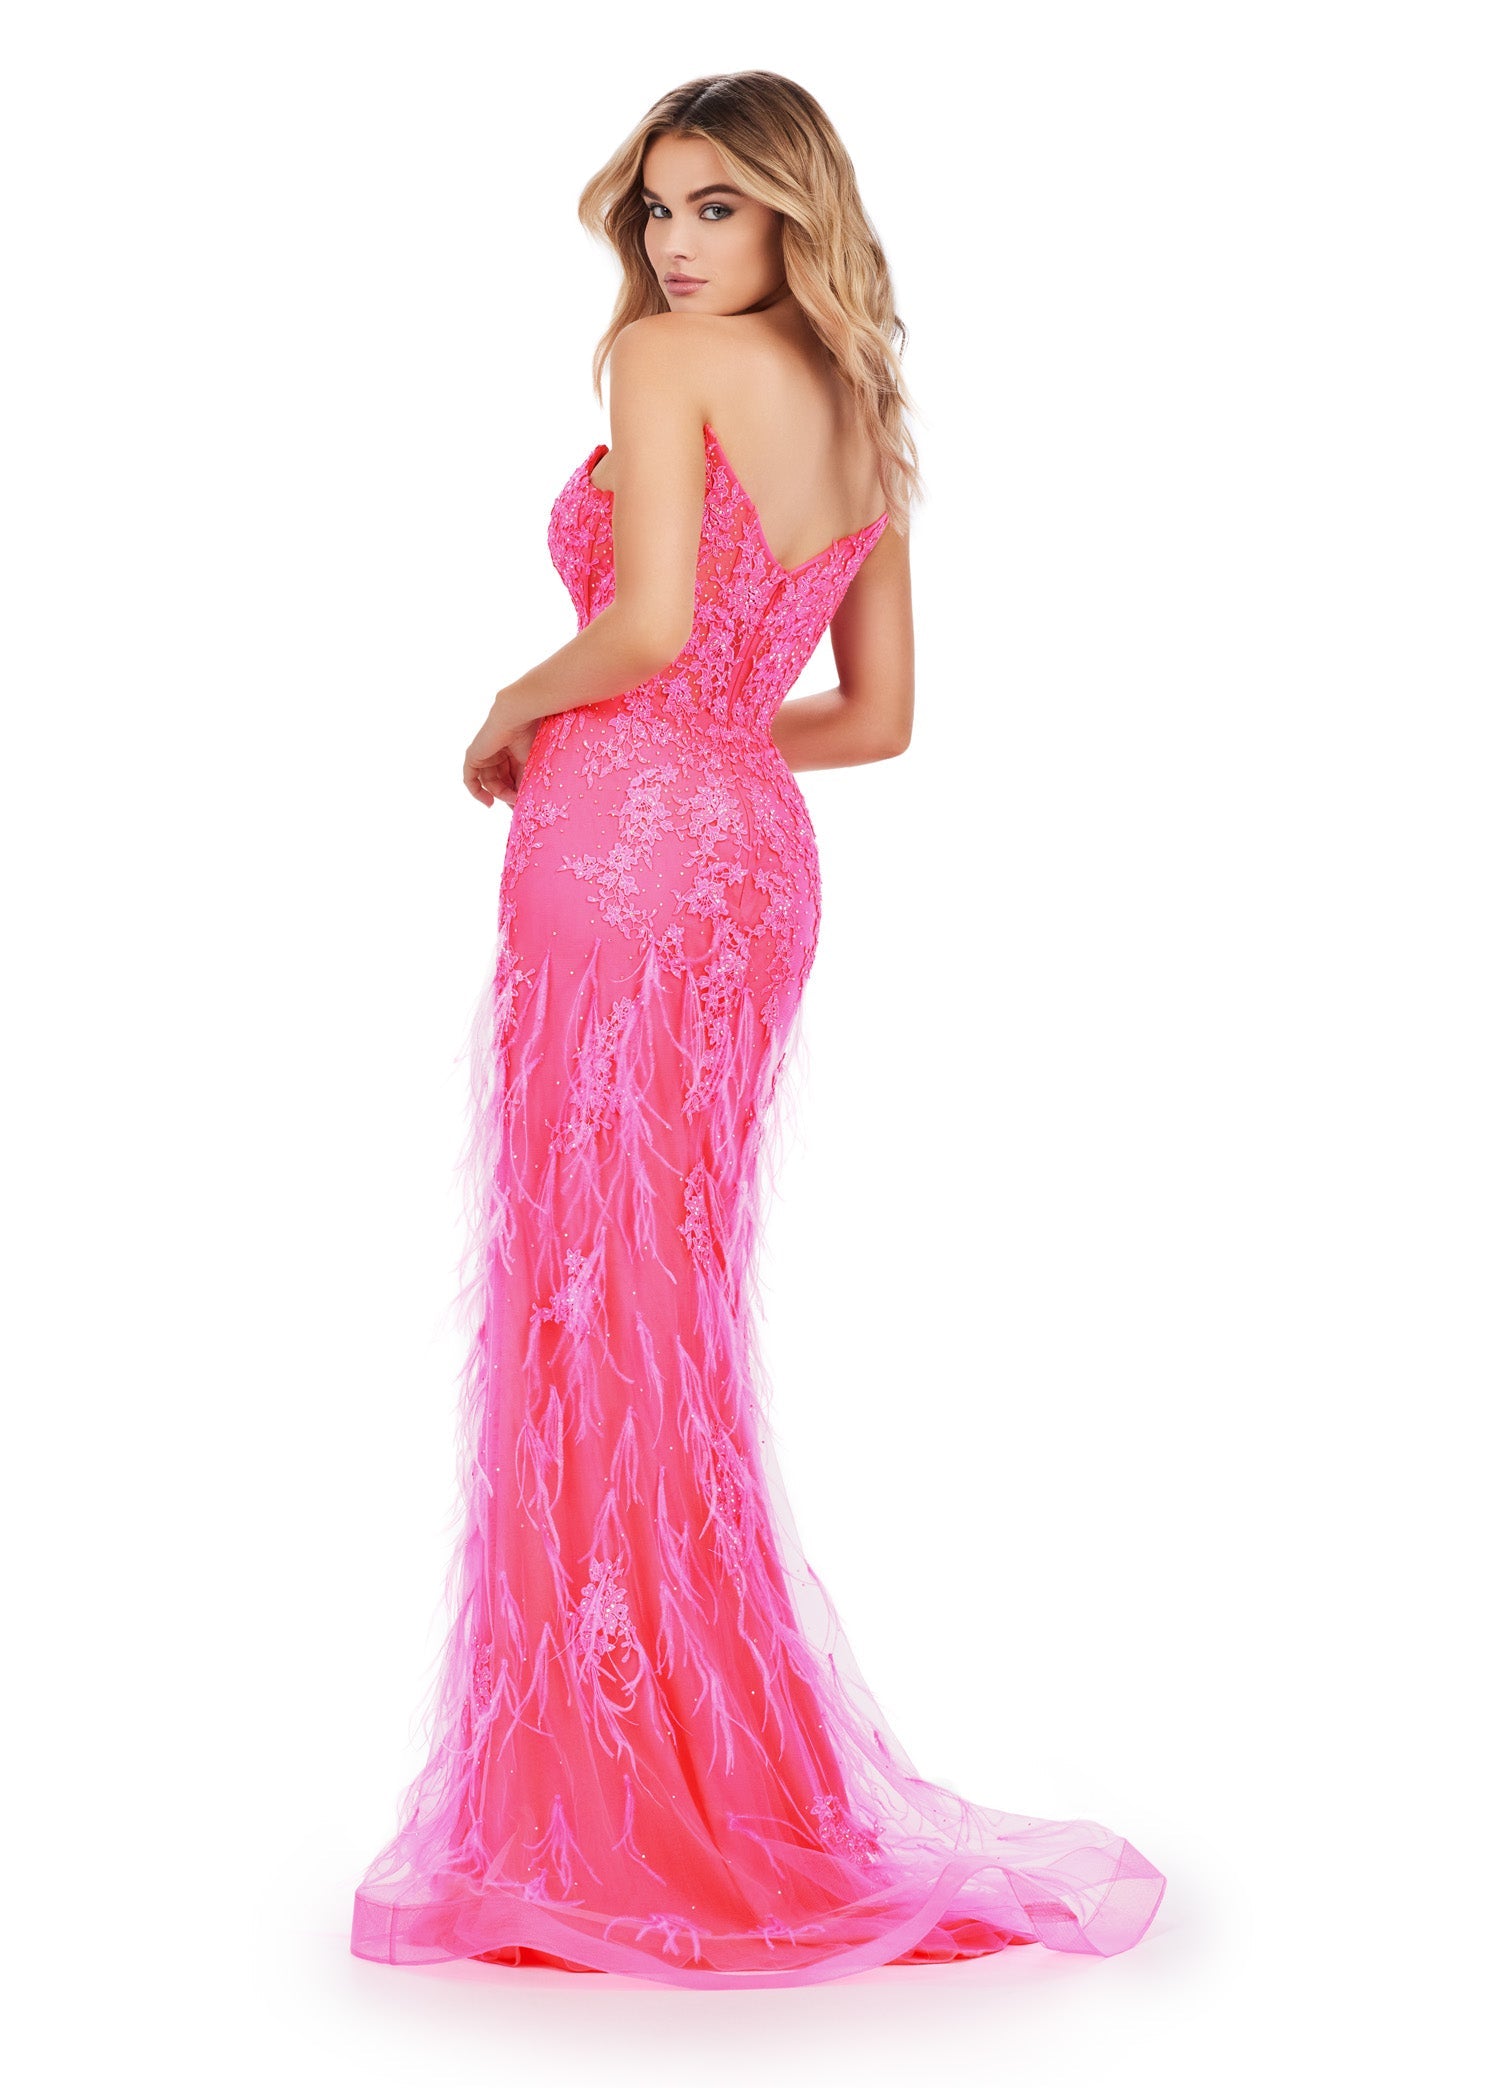 Elevate your elegance with the Ashley Lauren 11483 Long Prom Dress. This striking gown features a corset bodice, strapless design, and exquisite embroidered details. The v-neckline adds a touch of allure while the feather details bring a playful element. Perfect for formal events or pageants. Slay the night away in this lace embroidered gown. This dress features a strapless neckline and feathers throughout to help you feel fabulous.